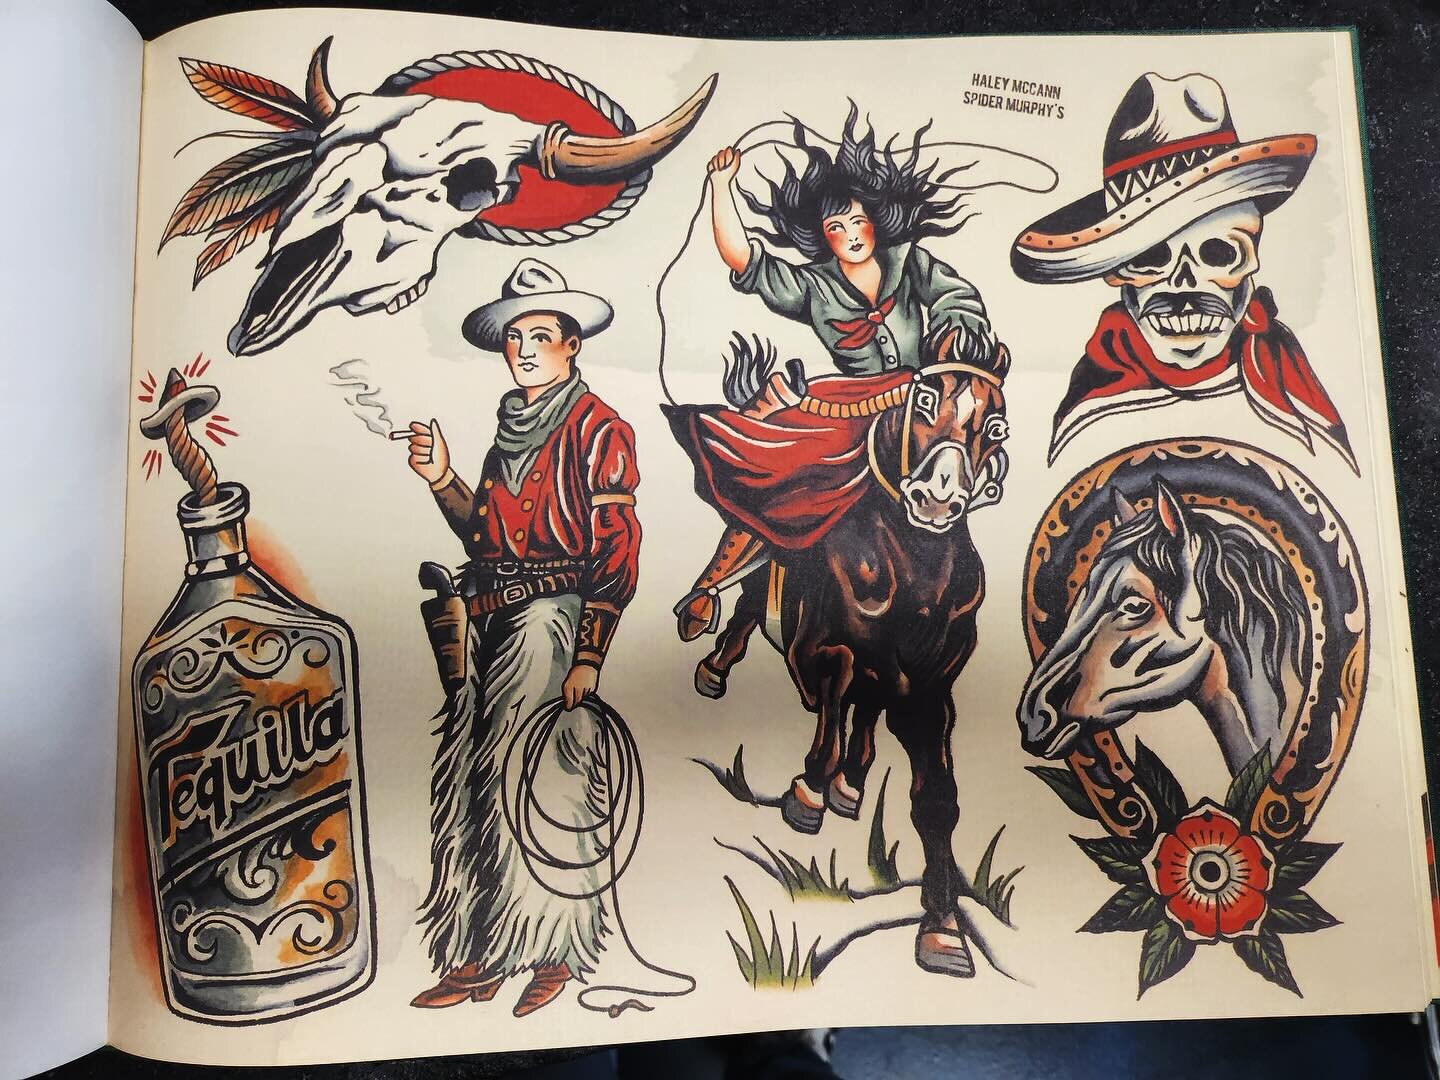 Some old school American Tradition designs by Haley McCann that I&rsquo;d love to do ! Black and Grey colorway also available 🐴
DM to book or questions! 
.
.
.
.
#americantraditional #oldschooltattoo #tattoo #americantraditionalflash #gwinnett #geor